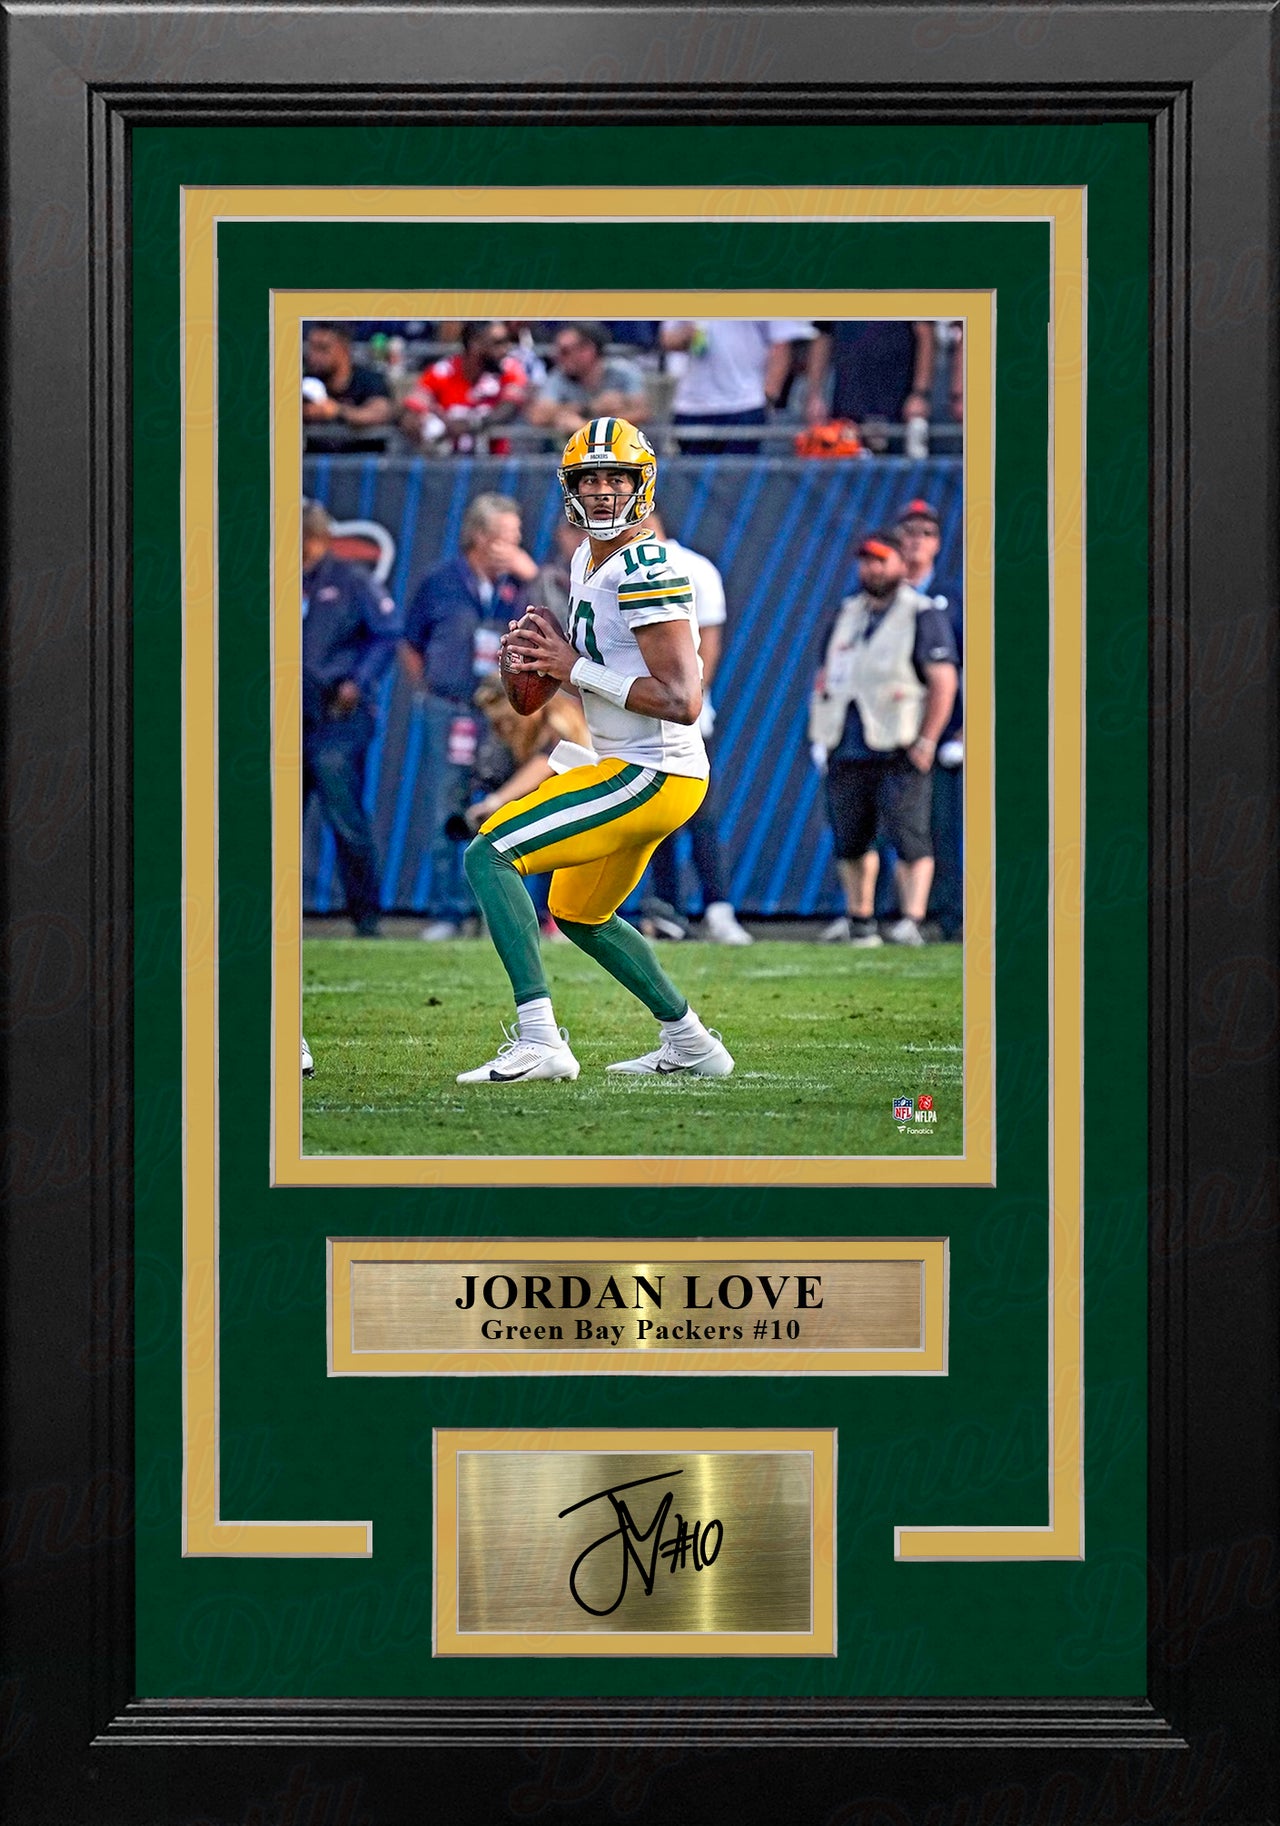 Jordan Love in Action Green Bay Packers 8" x 10" Framed Football Photo with Engraved Autograph